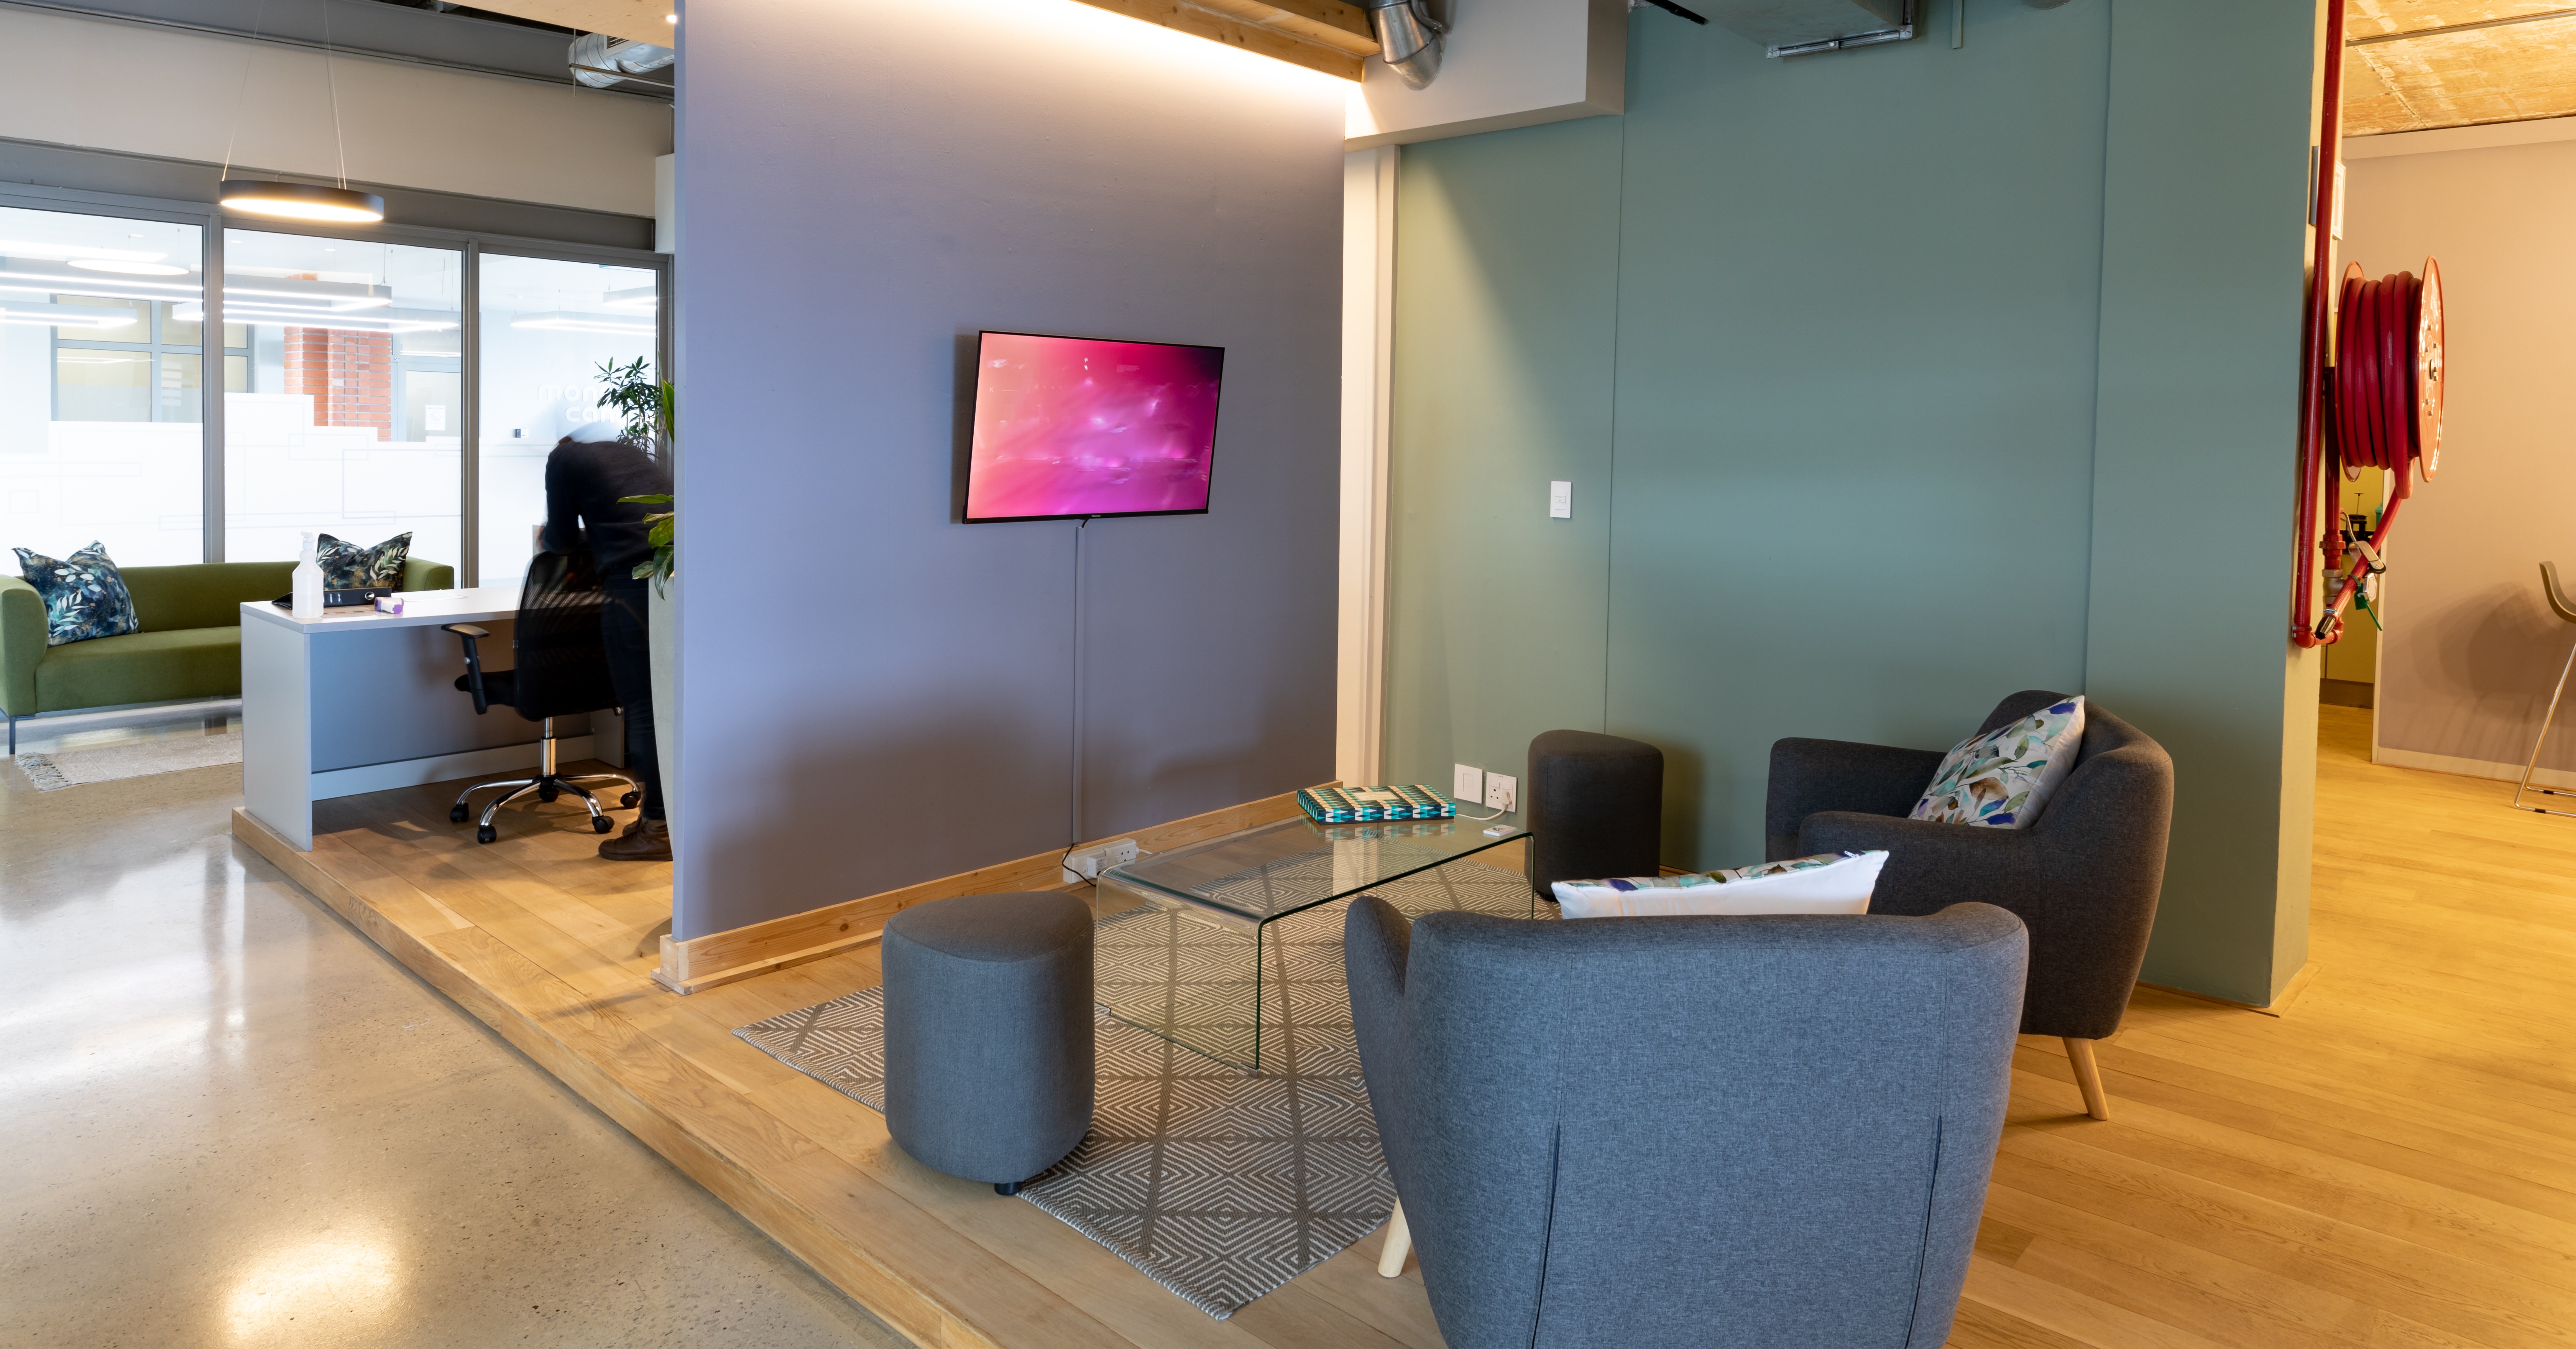 It's Time to Check the Digital Signage in Your Workplace